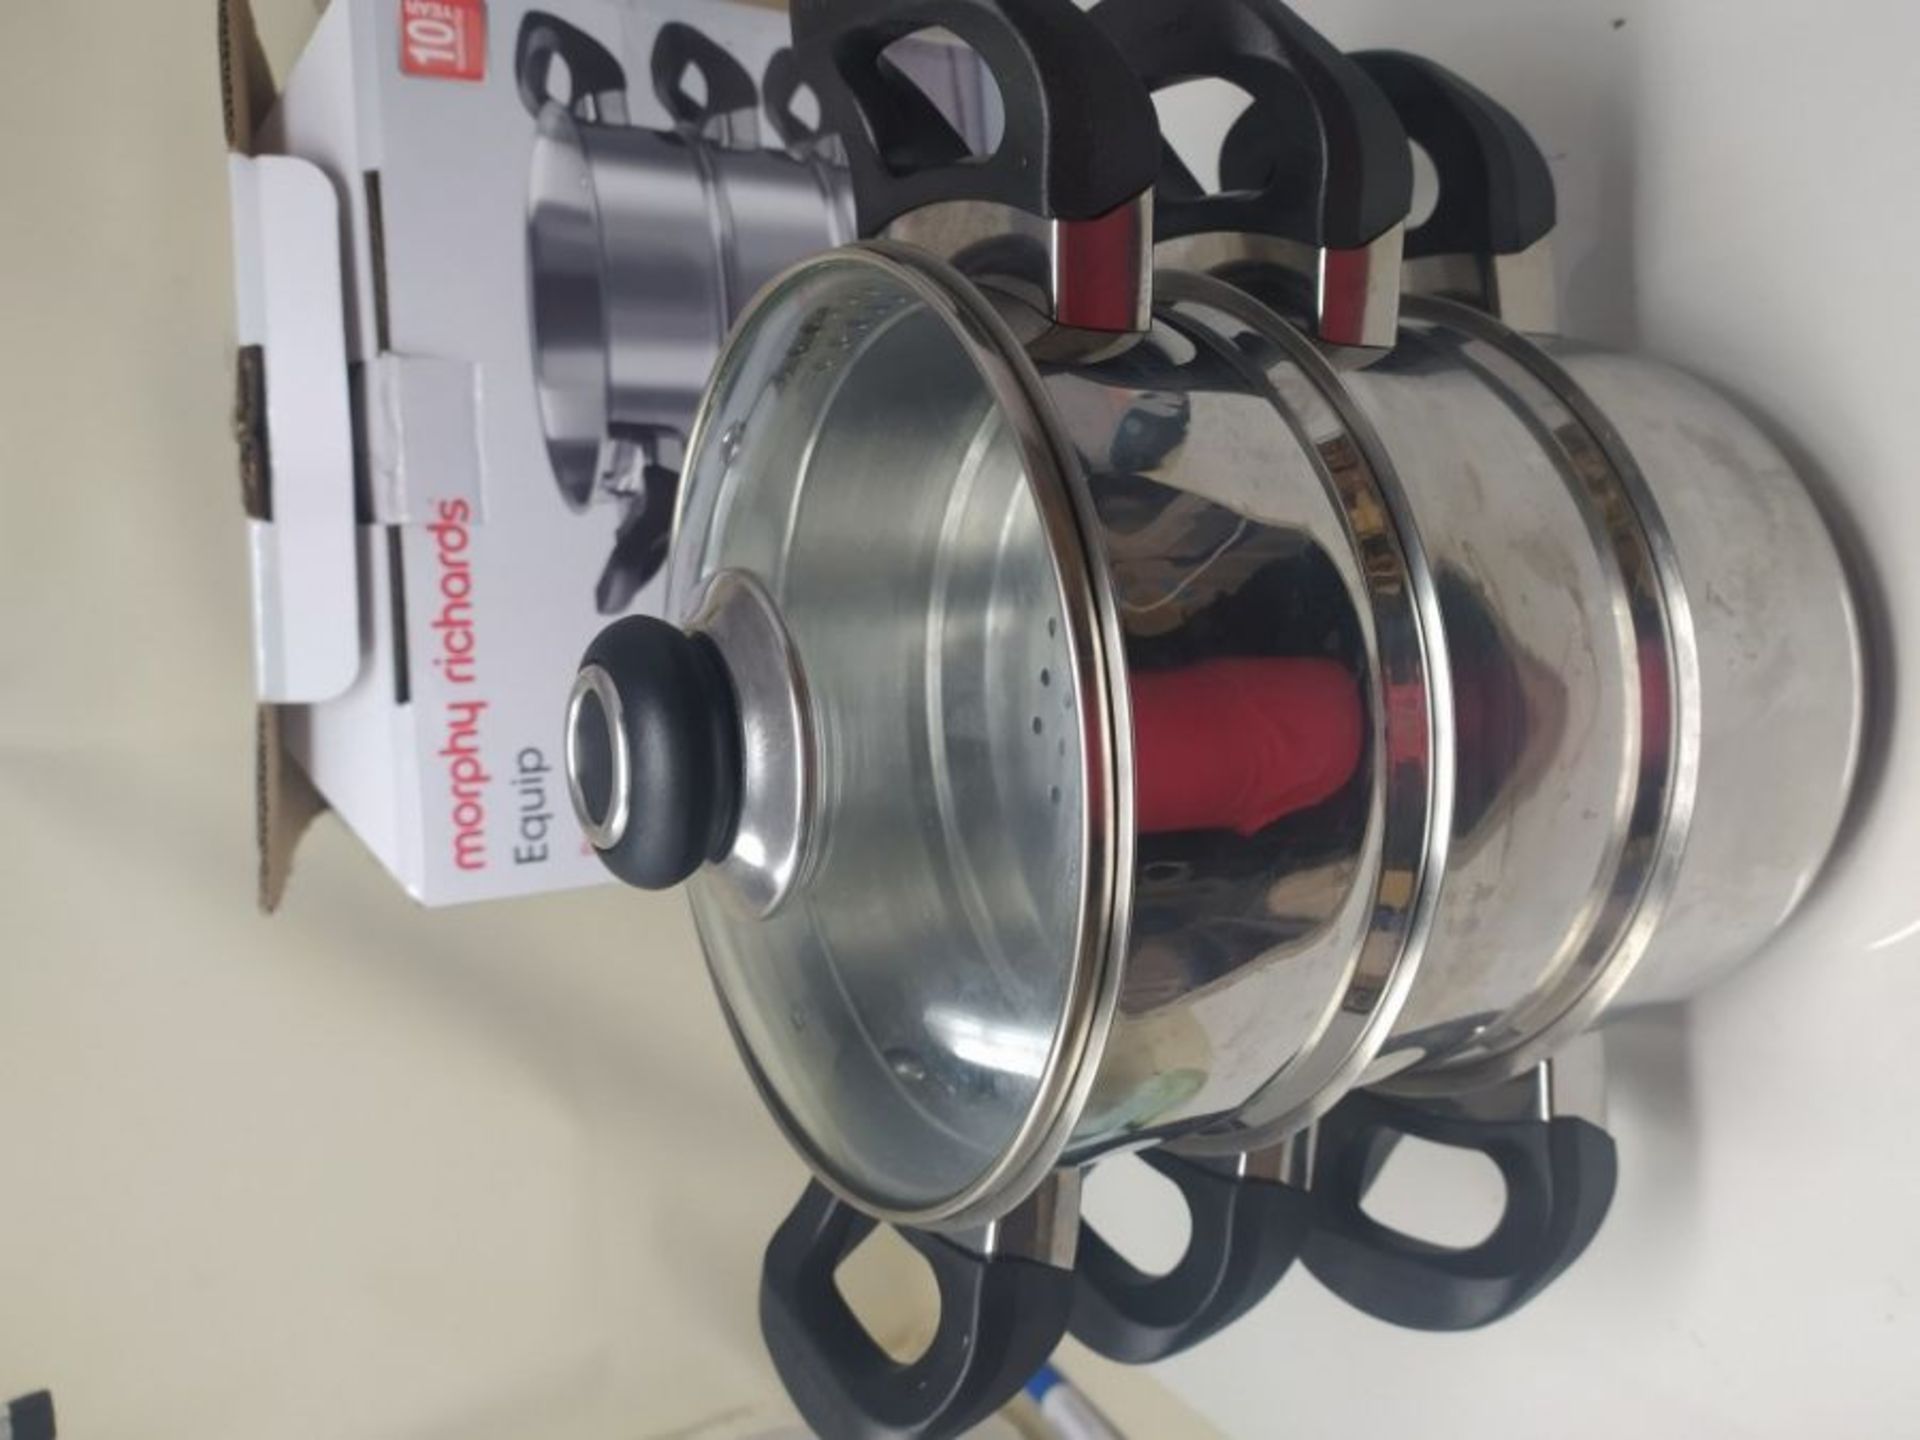 Morphy Richards Equip 970008 18cm 3 Tier Steamer with Tempered Glass Lid, Stainless St - Image 2 of 2